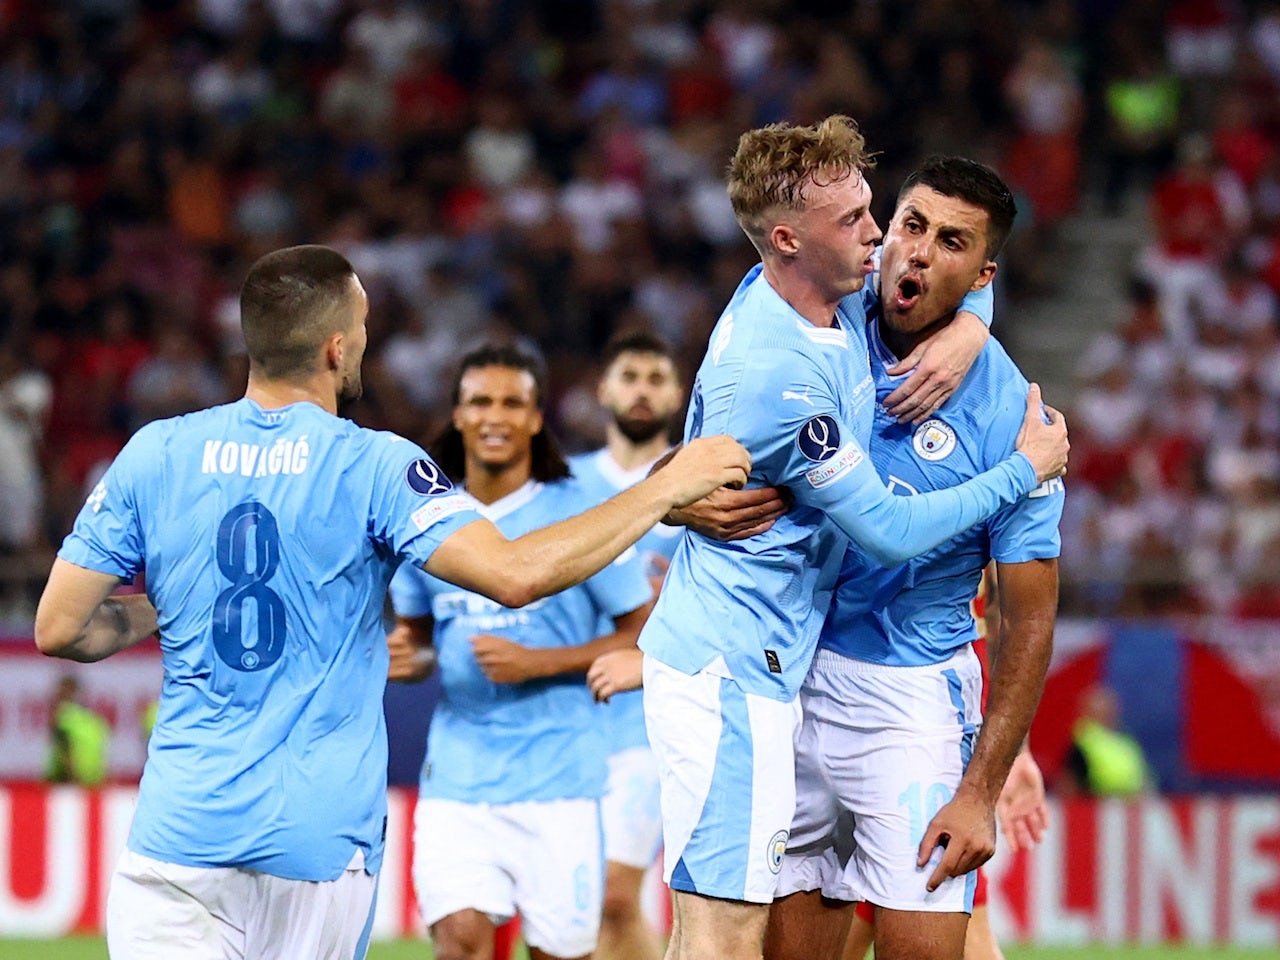 Manchester City beat Sevilla on penalties to win the UEFA Super Cup